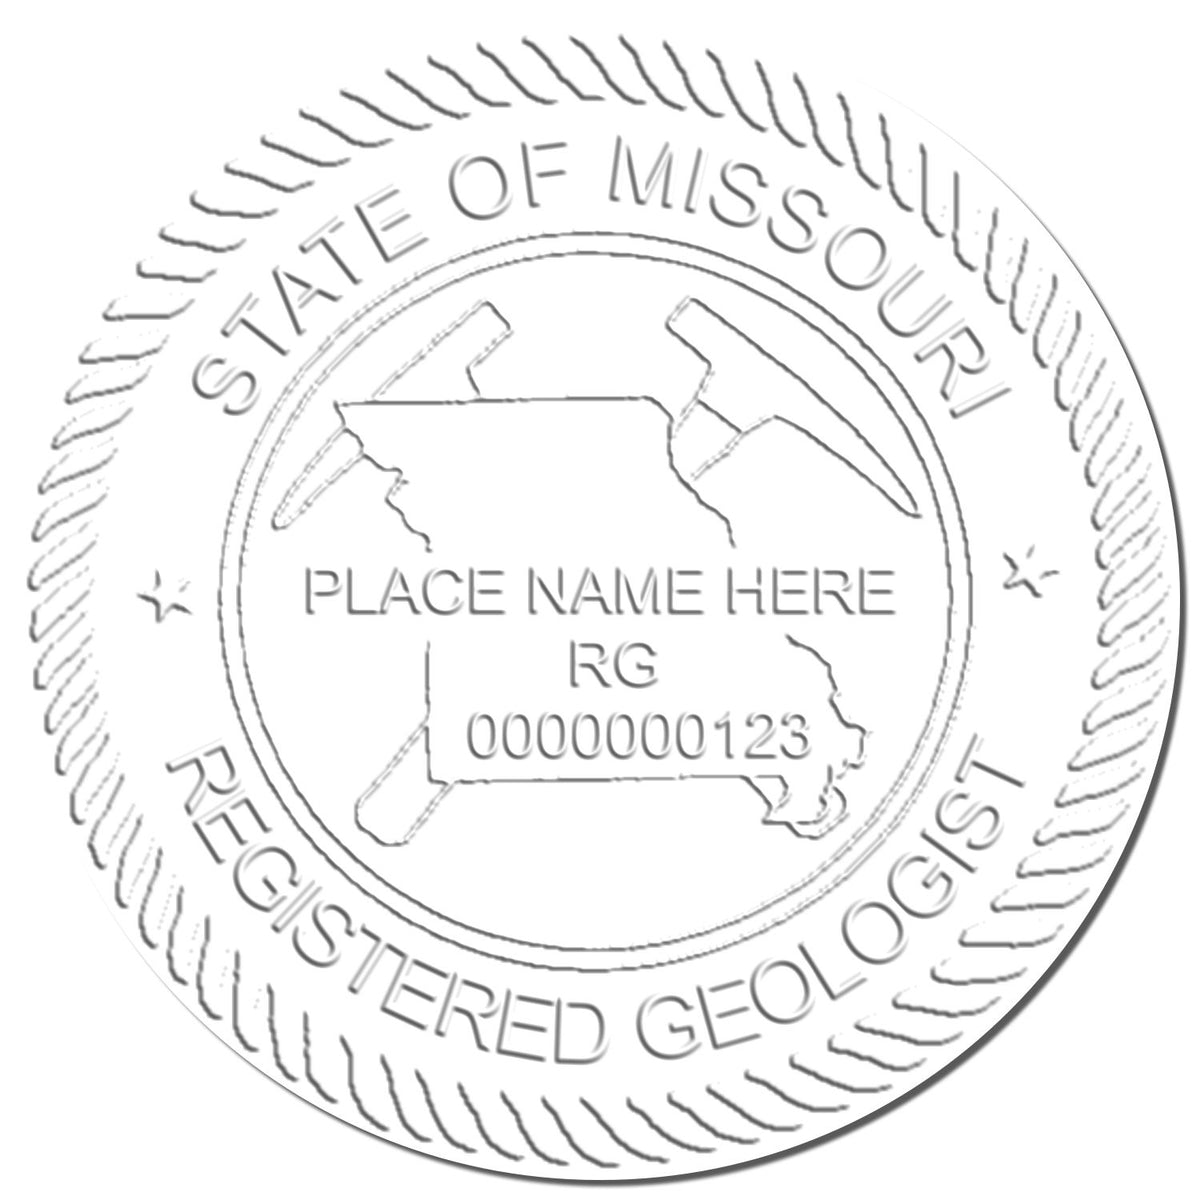 A photograph of the State of Missouri Extended Long Reach Geologist Seal stamp impression reveals a vivid, professional image of the on paper.